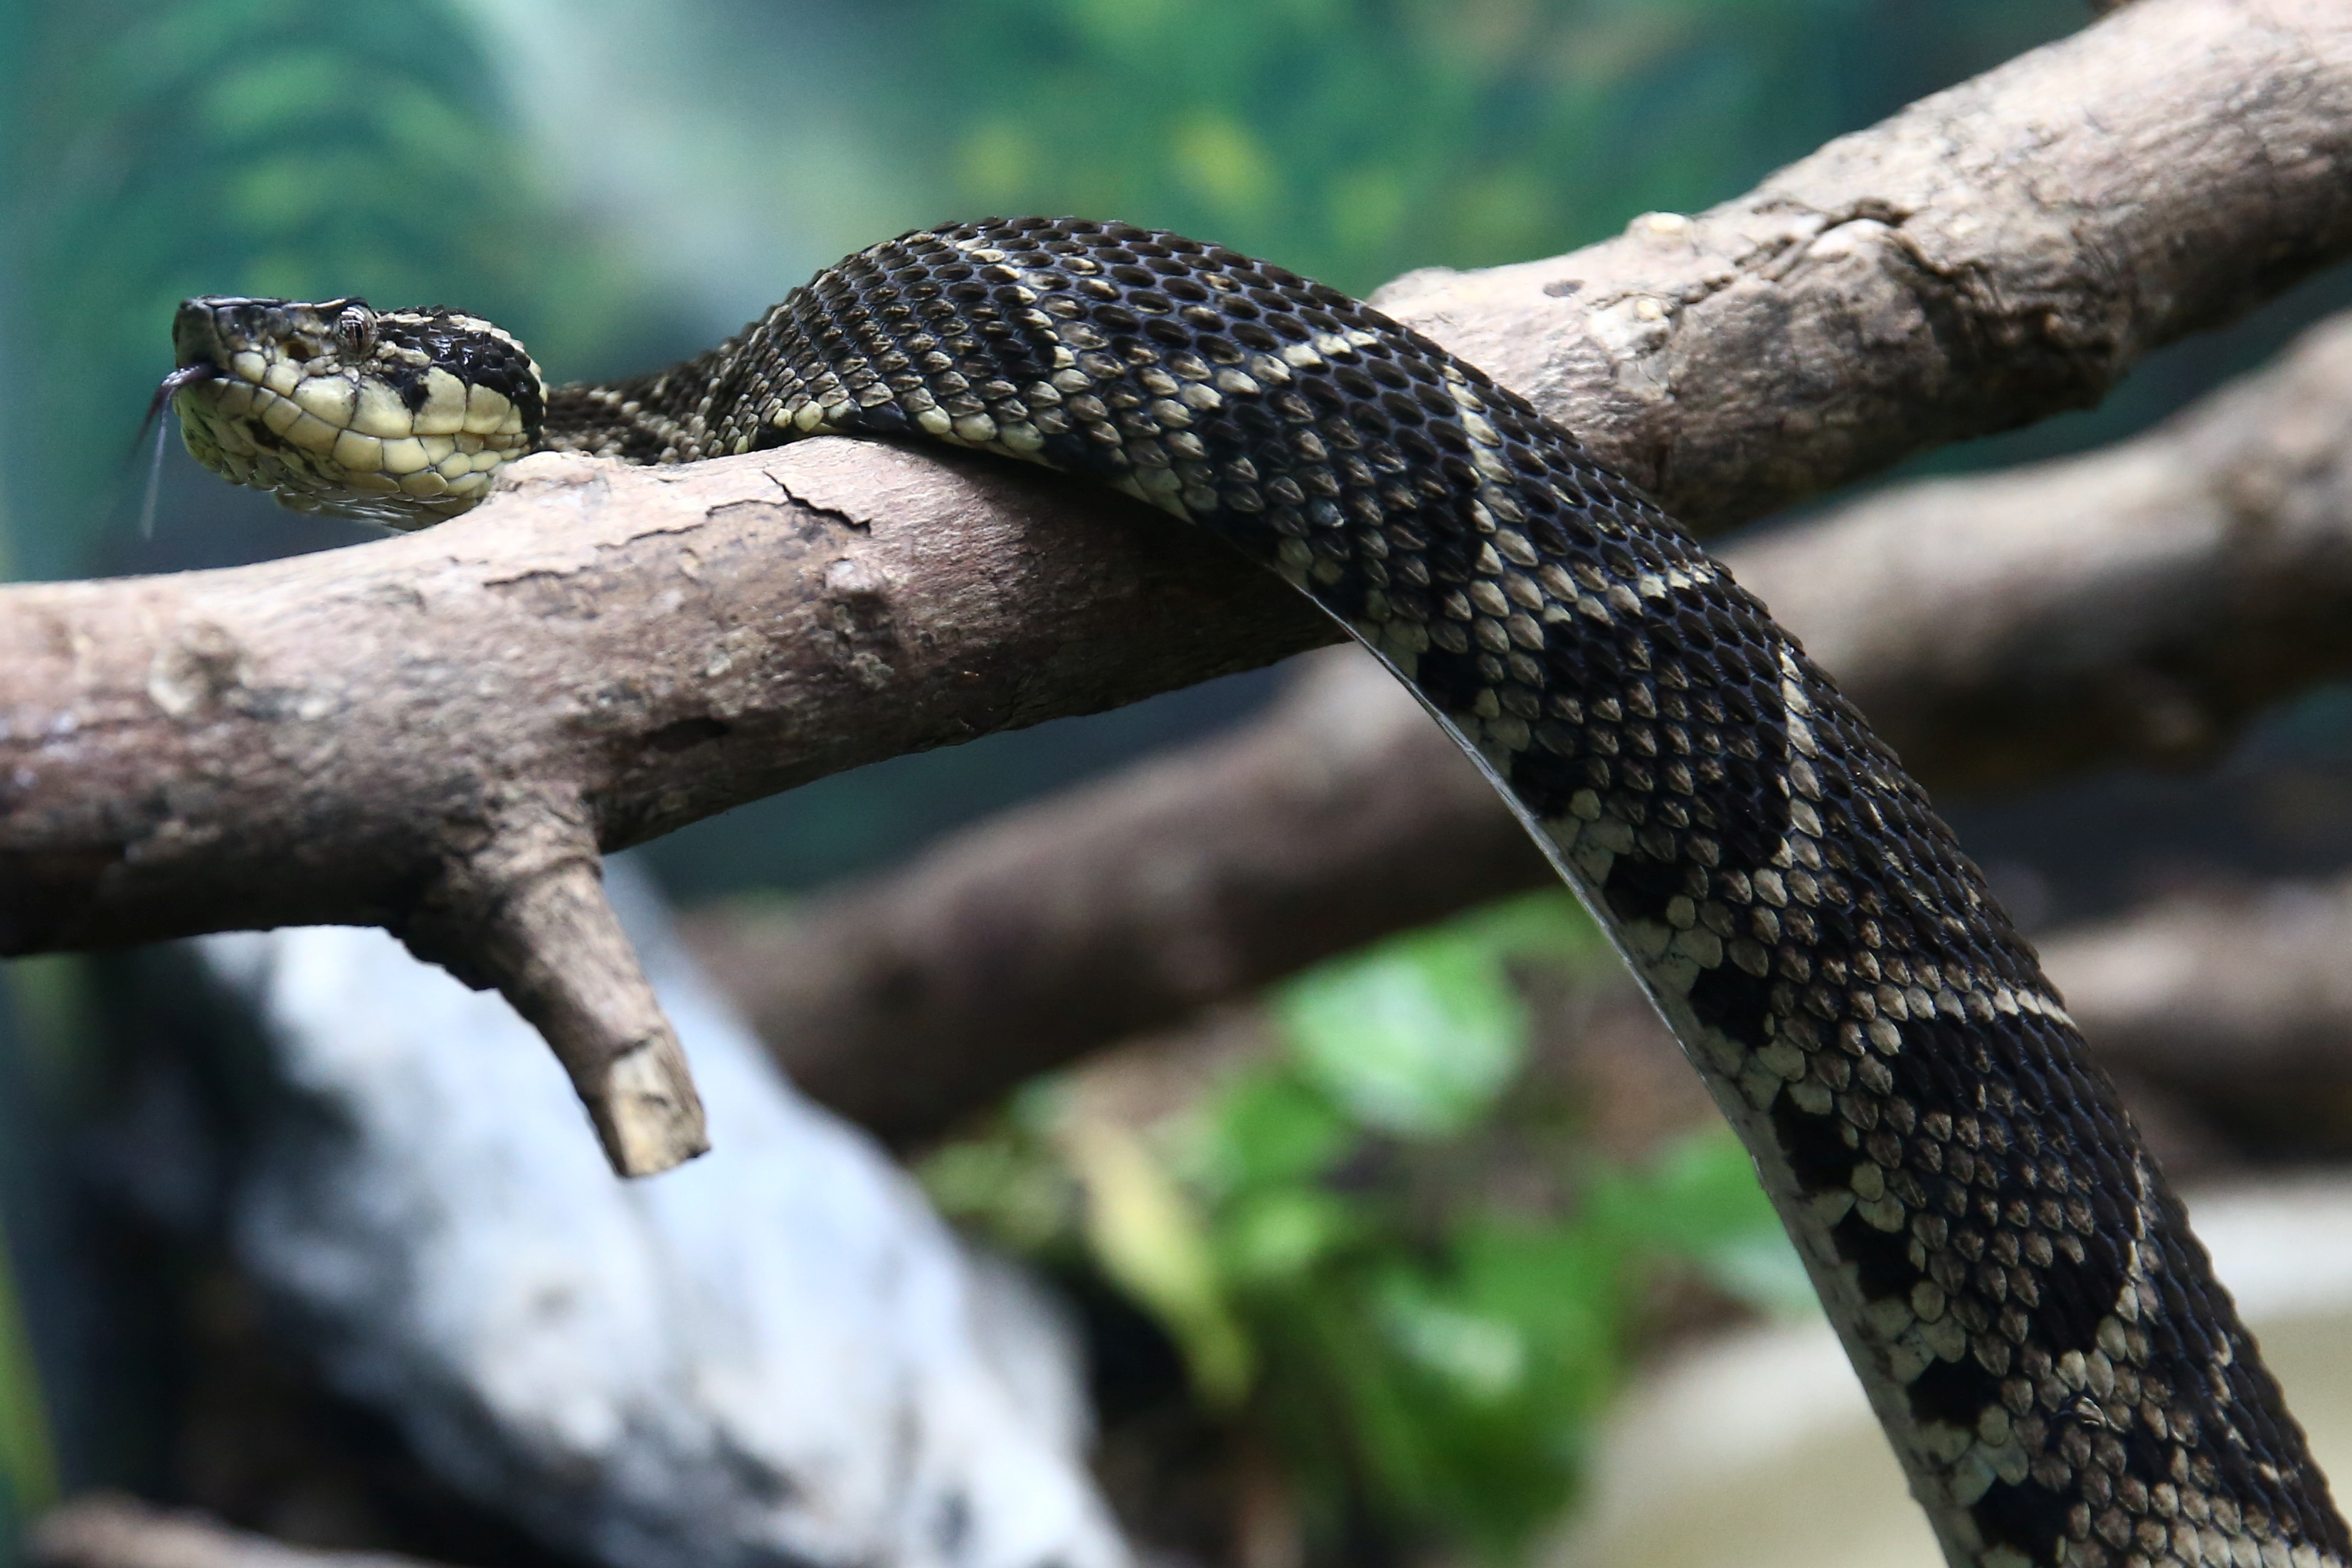 A jararacussu snake, whose venom is used in a study against the coronavirus disease (COVID-19), is seen at Butantan Institute in Sao Paulo, Brazil August 27, 2021. Picture taken August 27, 2021. REUTERS/Carla Carniel